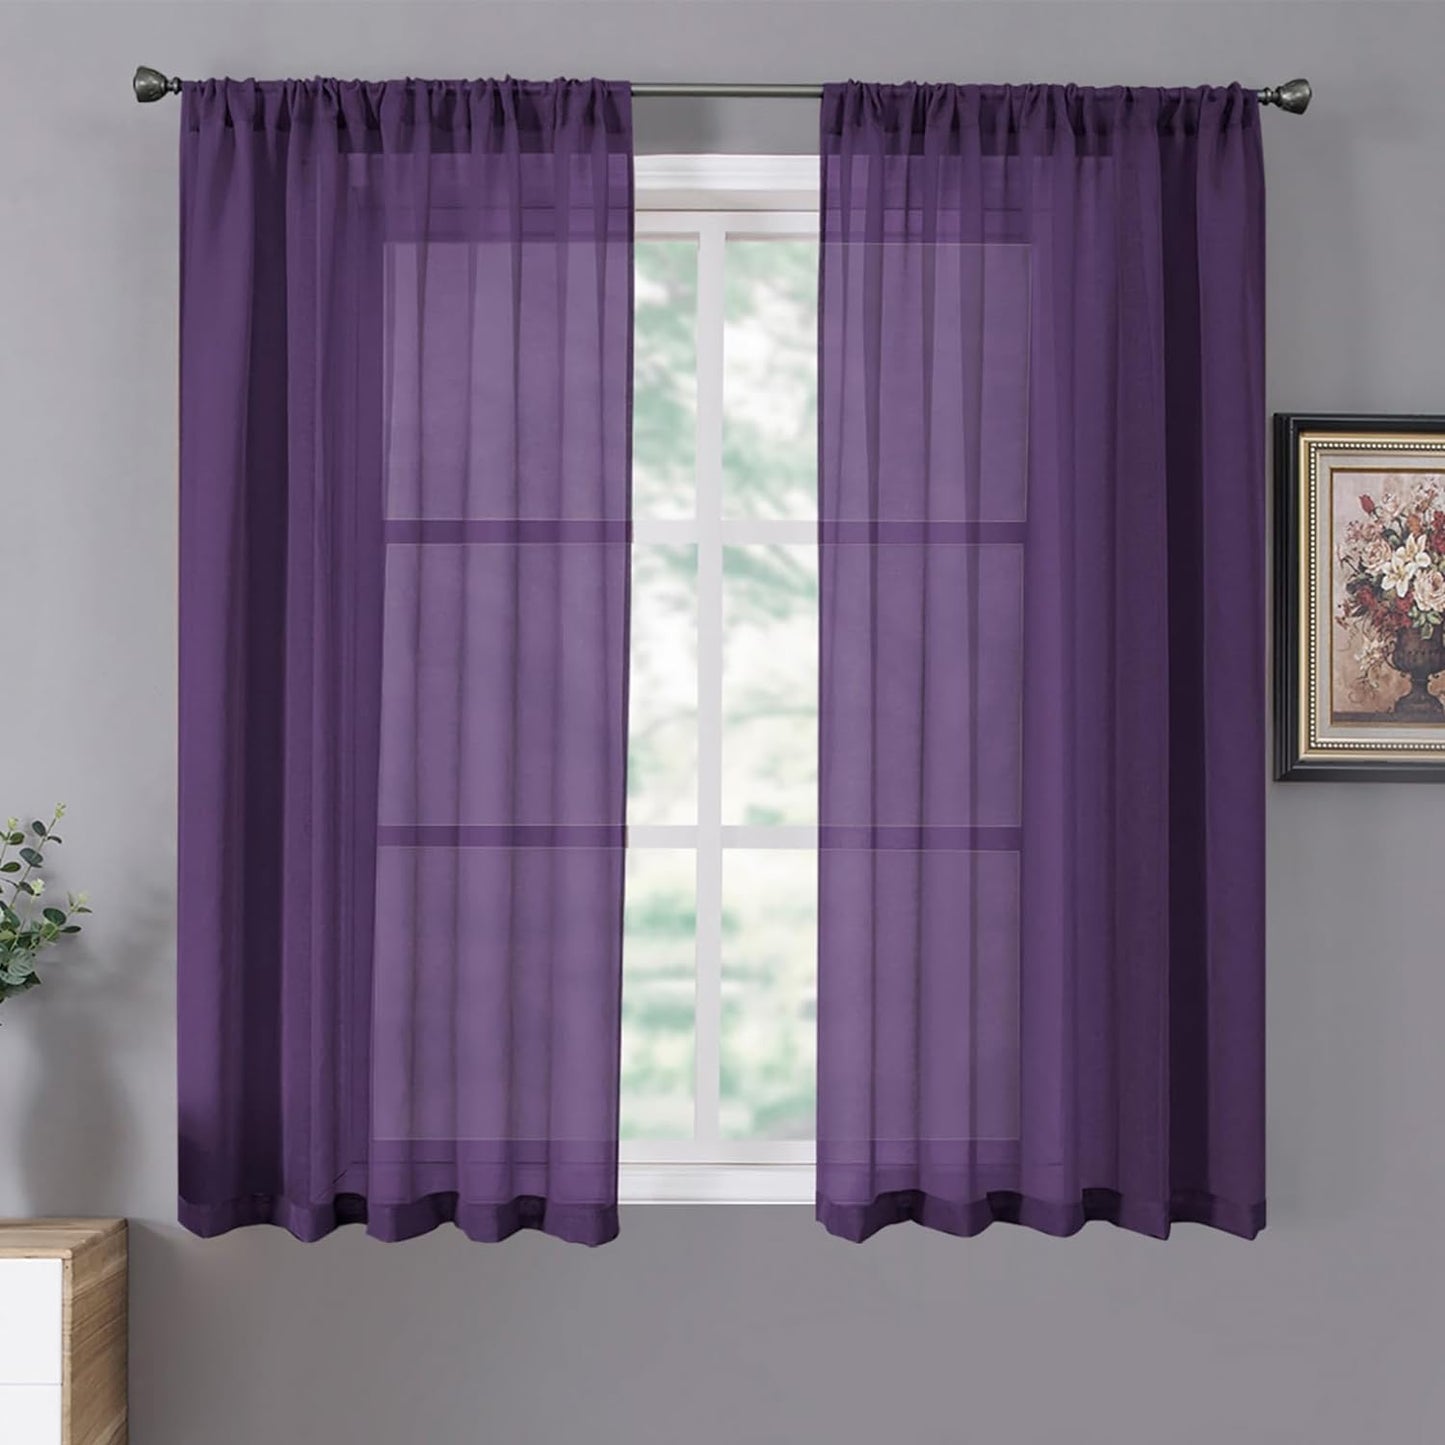 Tollpiz Short Sheer Curtains Linen Textured Bedroom Curtain Sheers Light Filtering Rod Pocket Voile Curtains for Living Room, 54 X 45 Inches Long, White, Set of 2 Panels  Tollpiz Tex Royal Purple 38"W X 45"L 